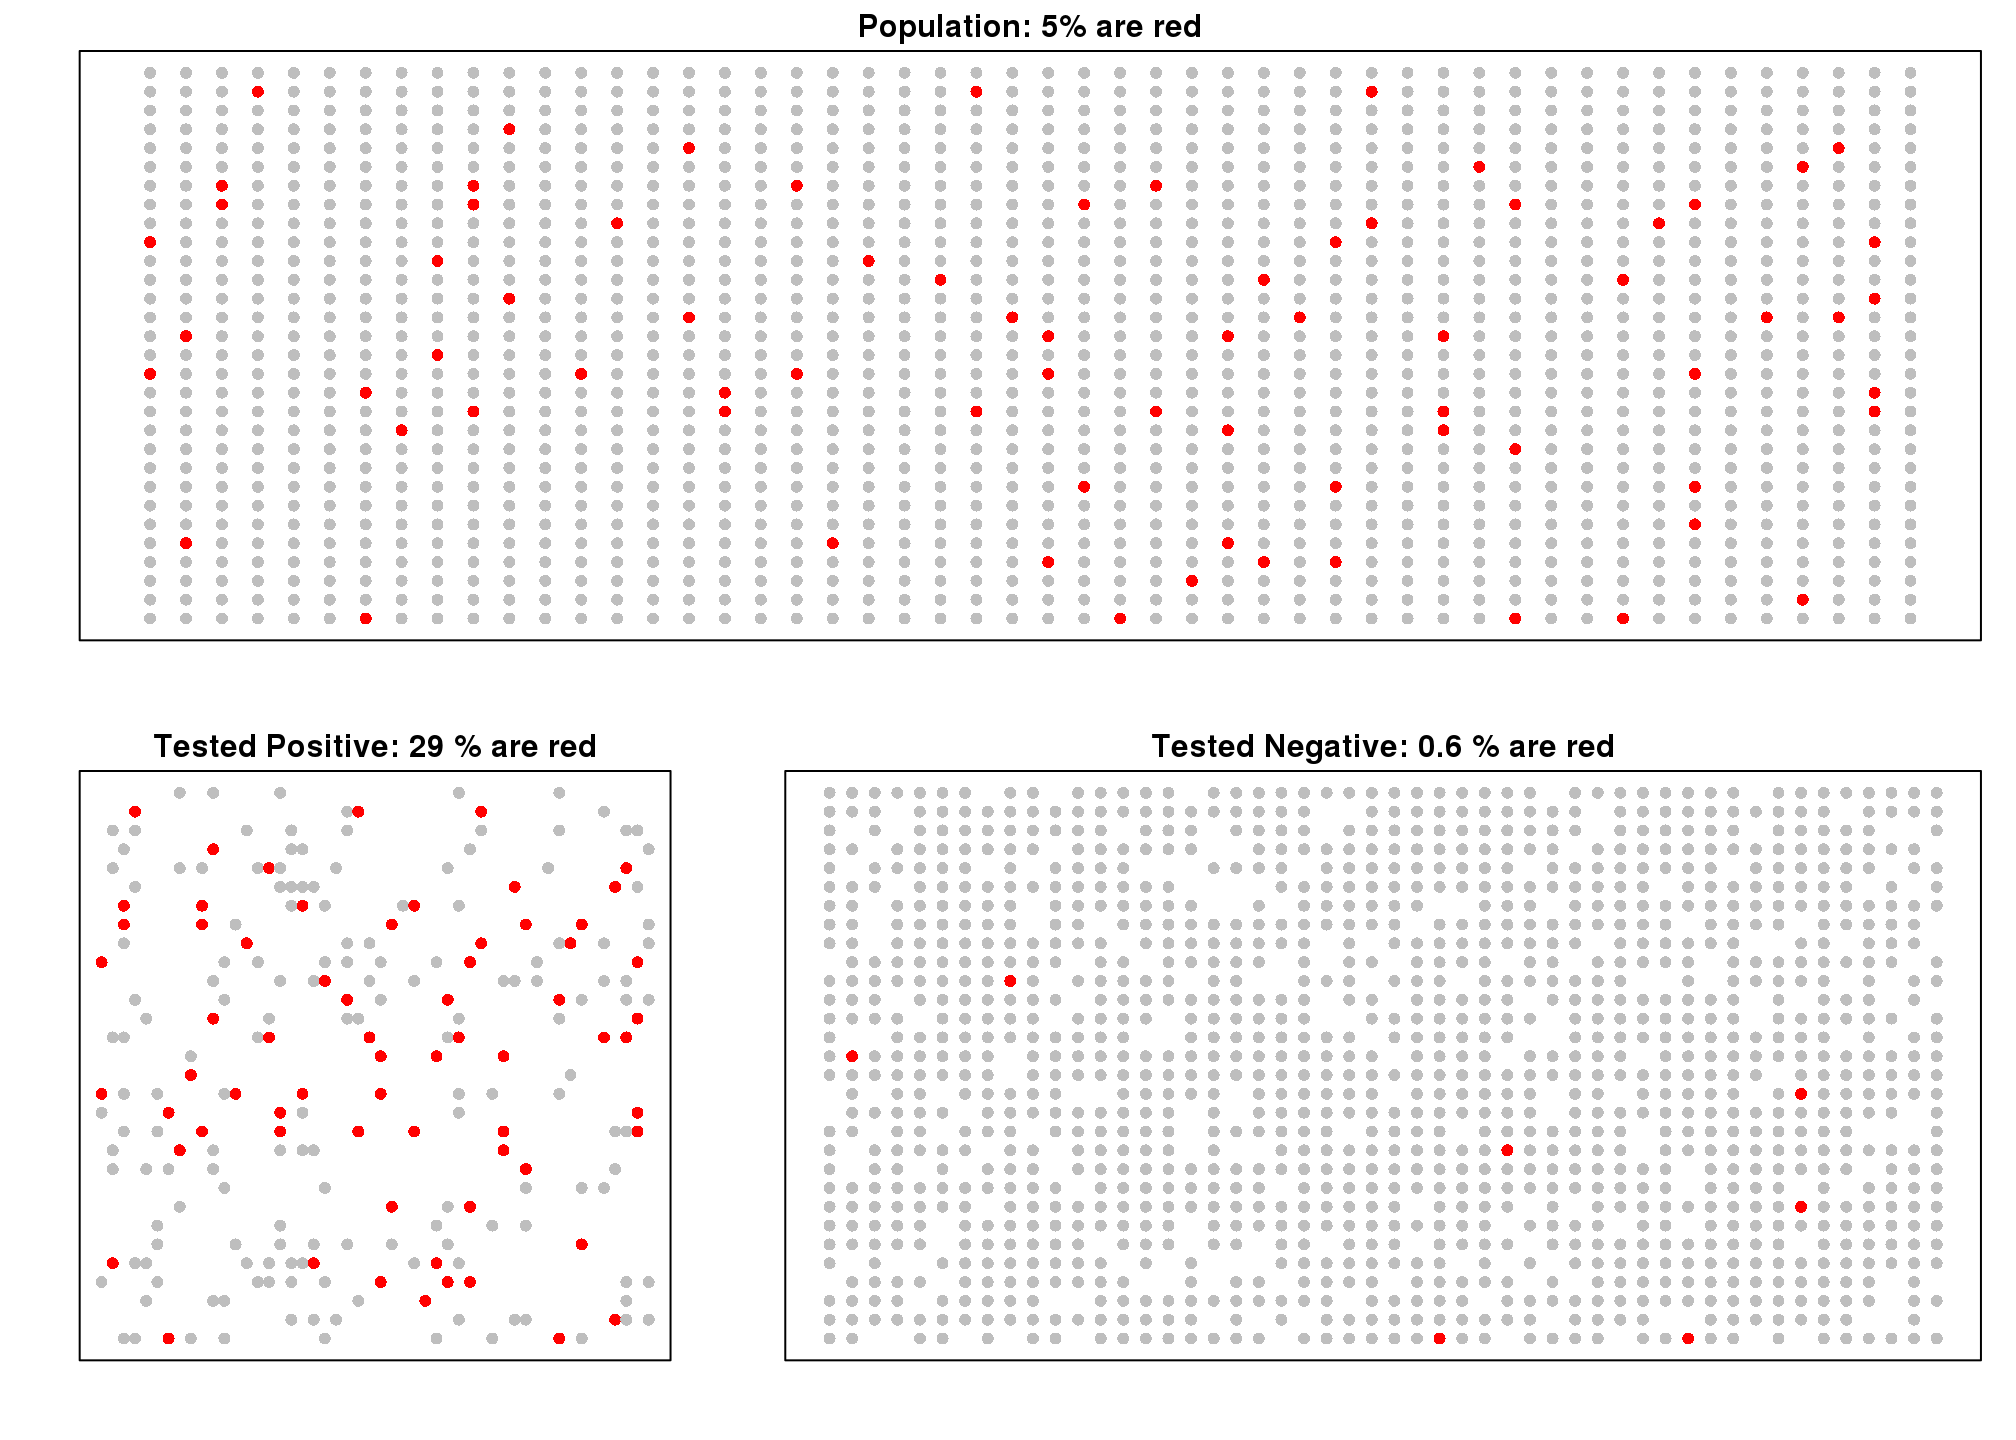 Simulation demonstrating Bayes theorem. Top plot shows every individual with red denoting cases. Each one takes a test and with 90% gives correct answer. Those called positive (either correctly or incorrectly) are put in the bottom left pane. Those called negative in the bottom right.